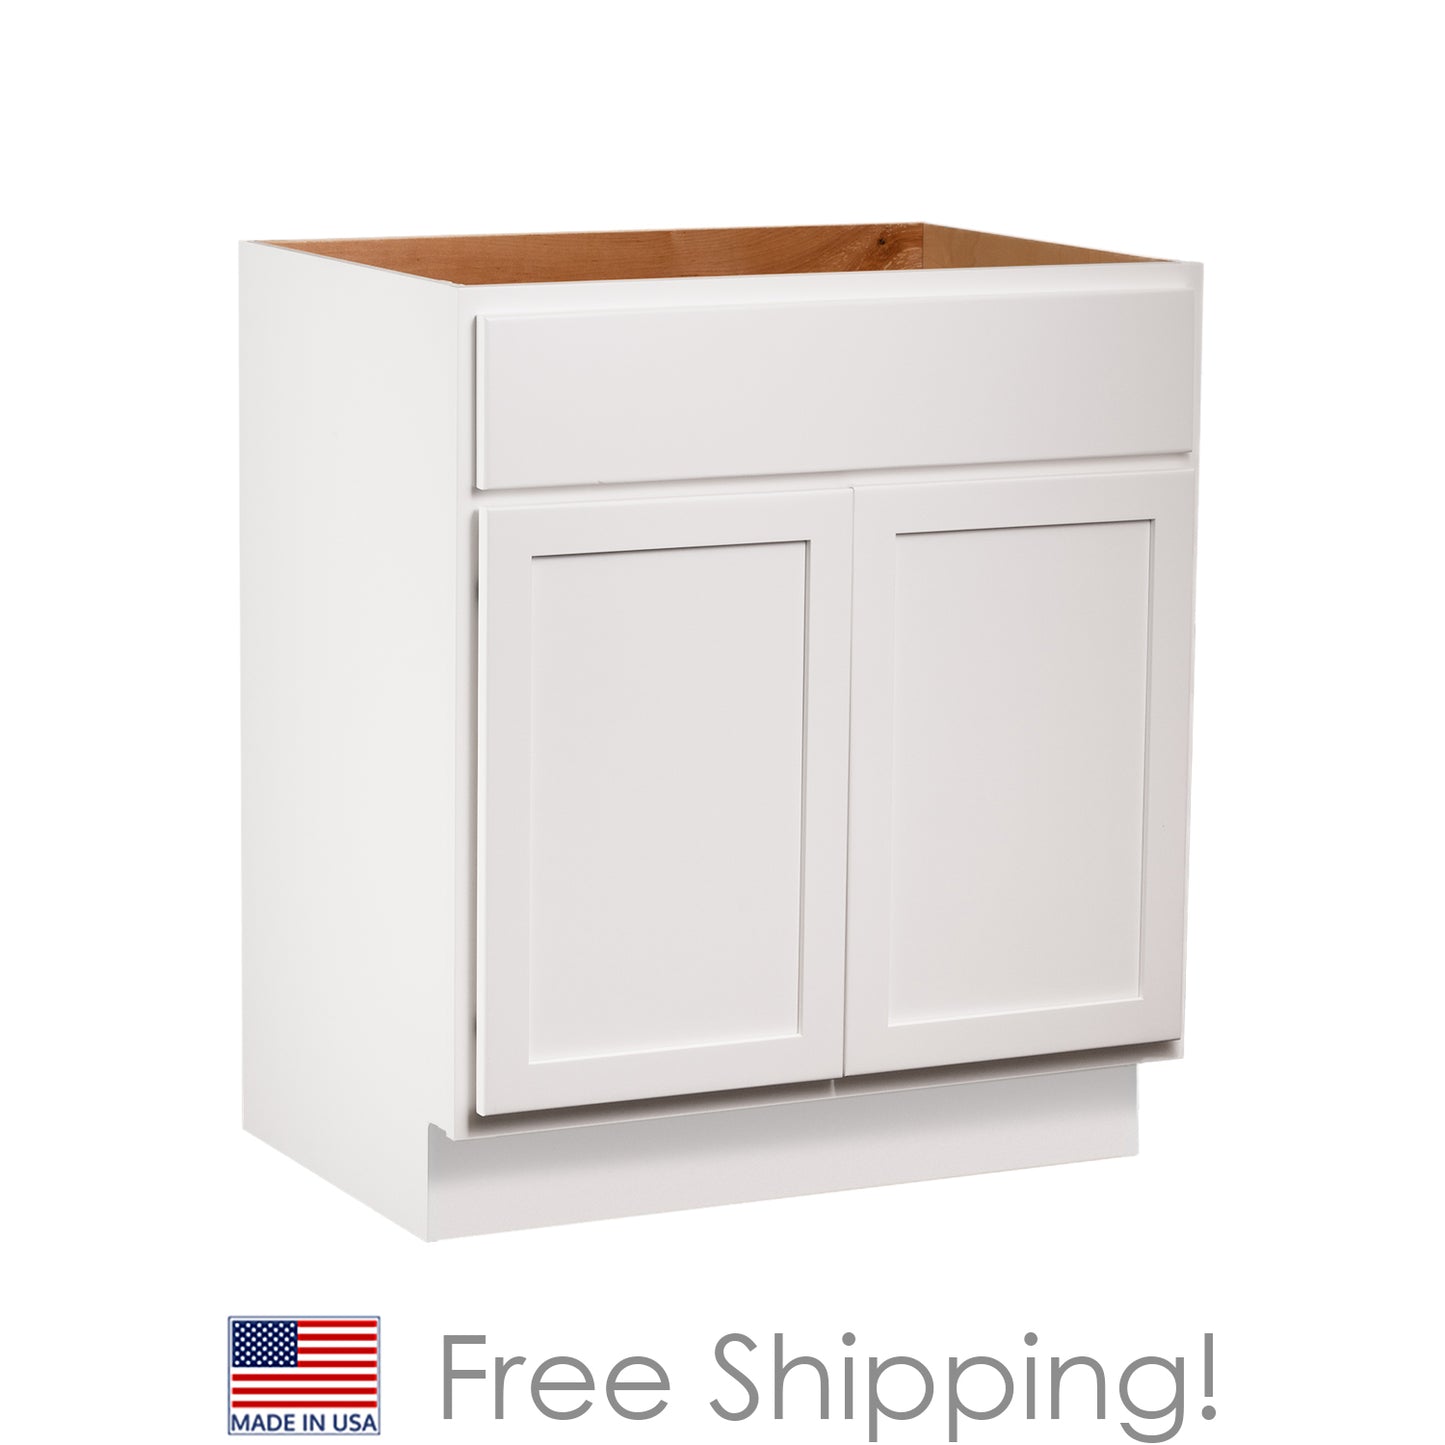 Quicklock RTA (Ready-to-Assemble) Pure White Vanity Base Cabinet | 36"Wx34.5"Hx18"D